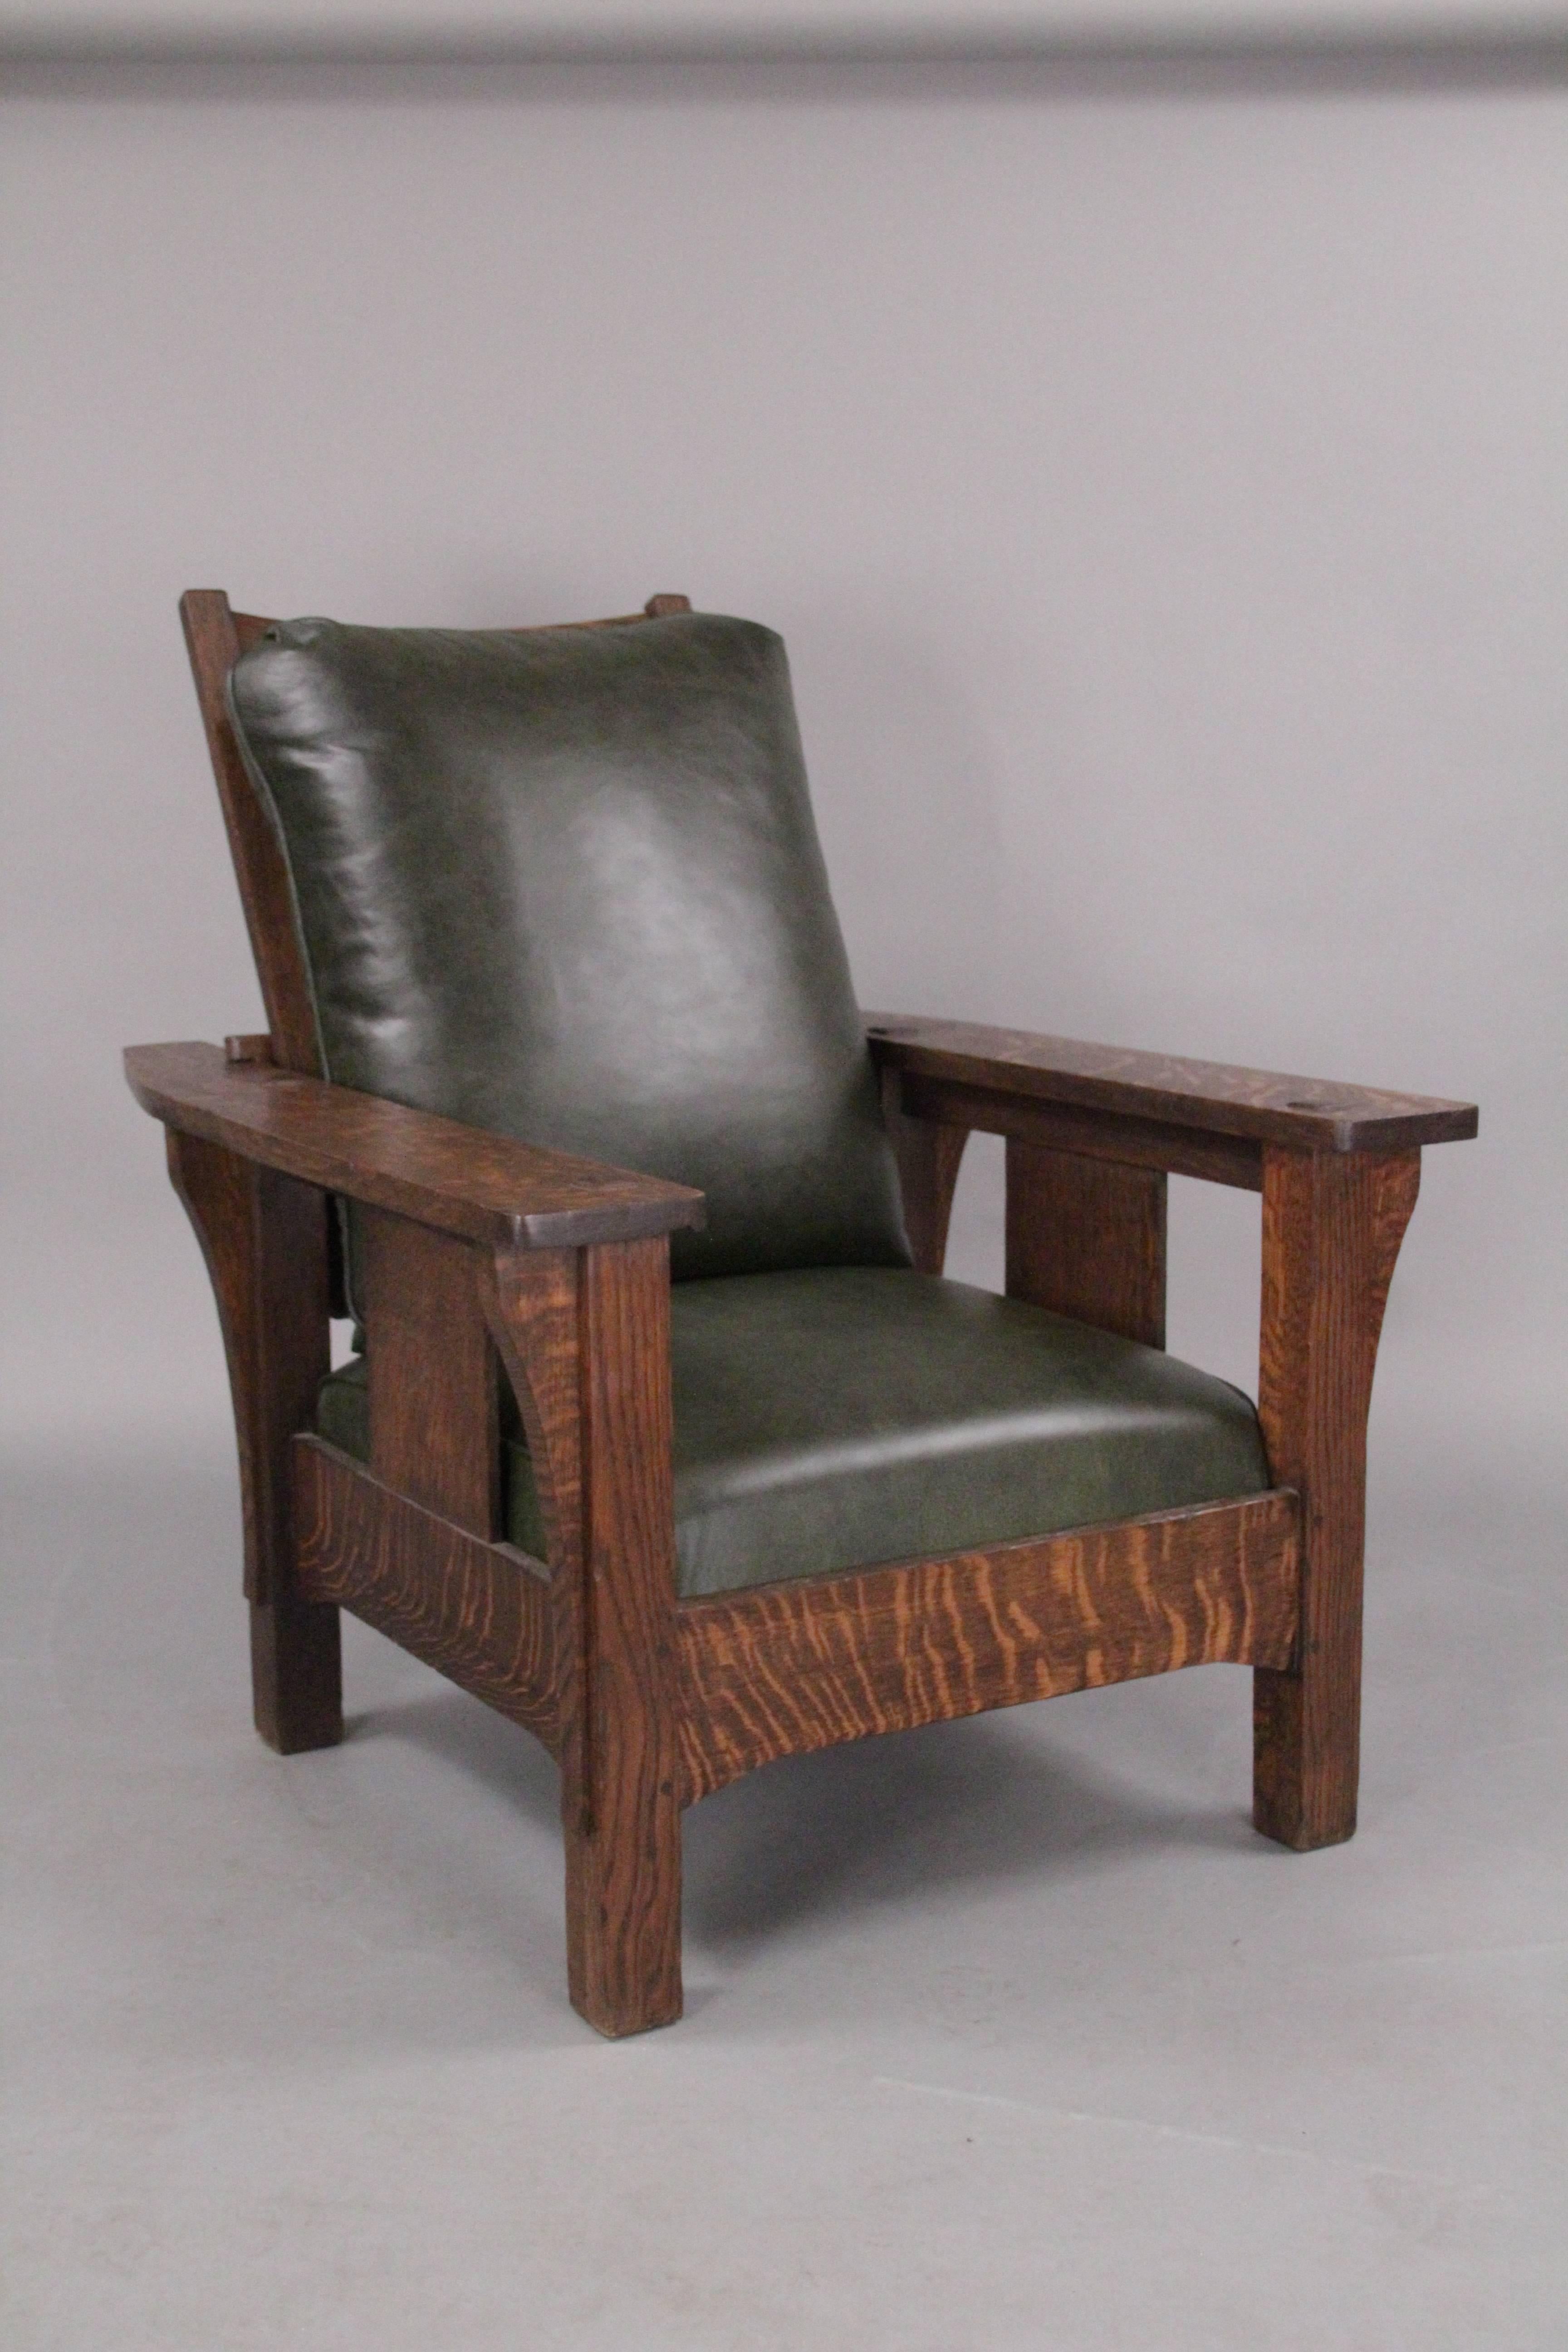 Early 20th Century Large-Scale Arts and Crafts Morris Chair, circa 1910